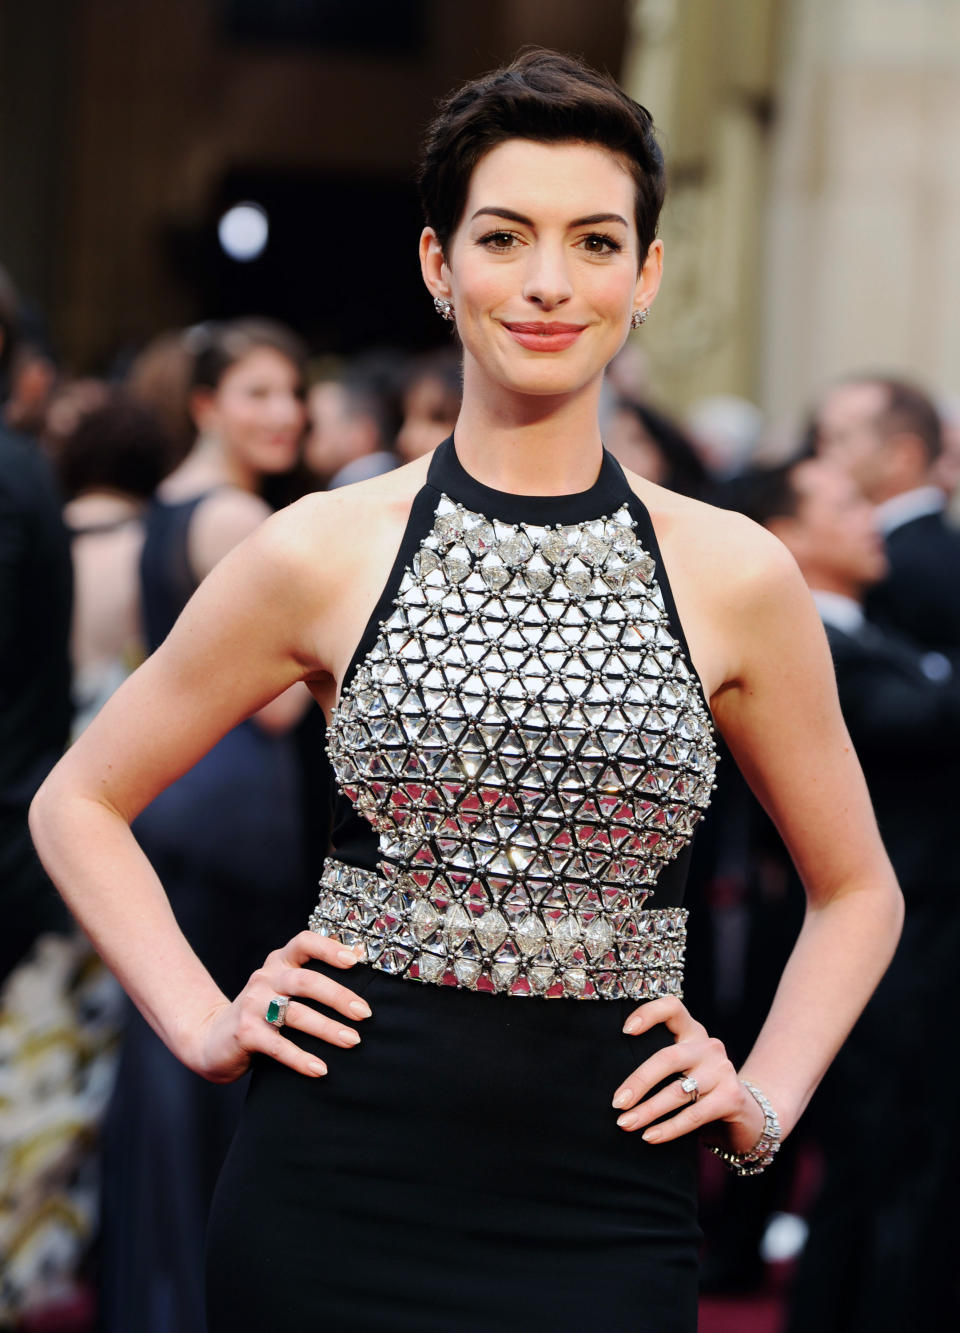 Anne Hathaway arrives at the Oscars on Sunday, March 2, 2014, at the Dolby Theatre in Los Angeles. (Photo by Chris Pizzello/Invision/AP)